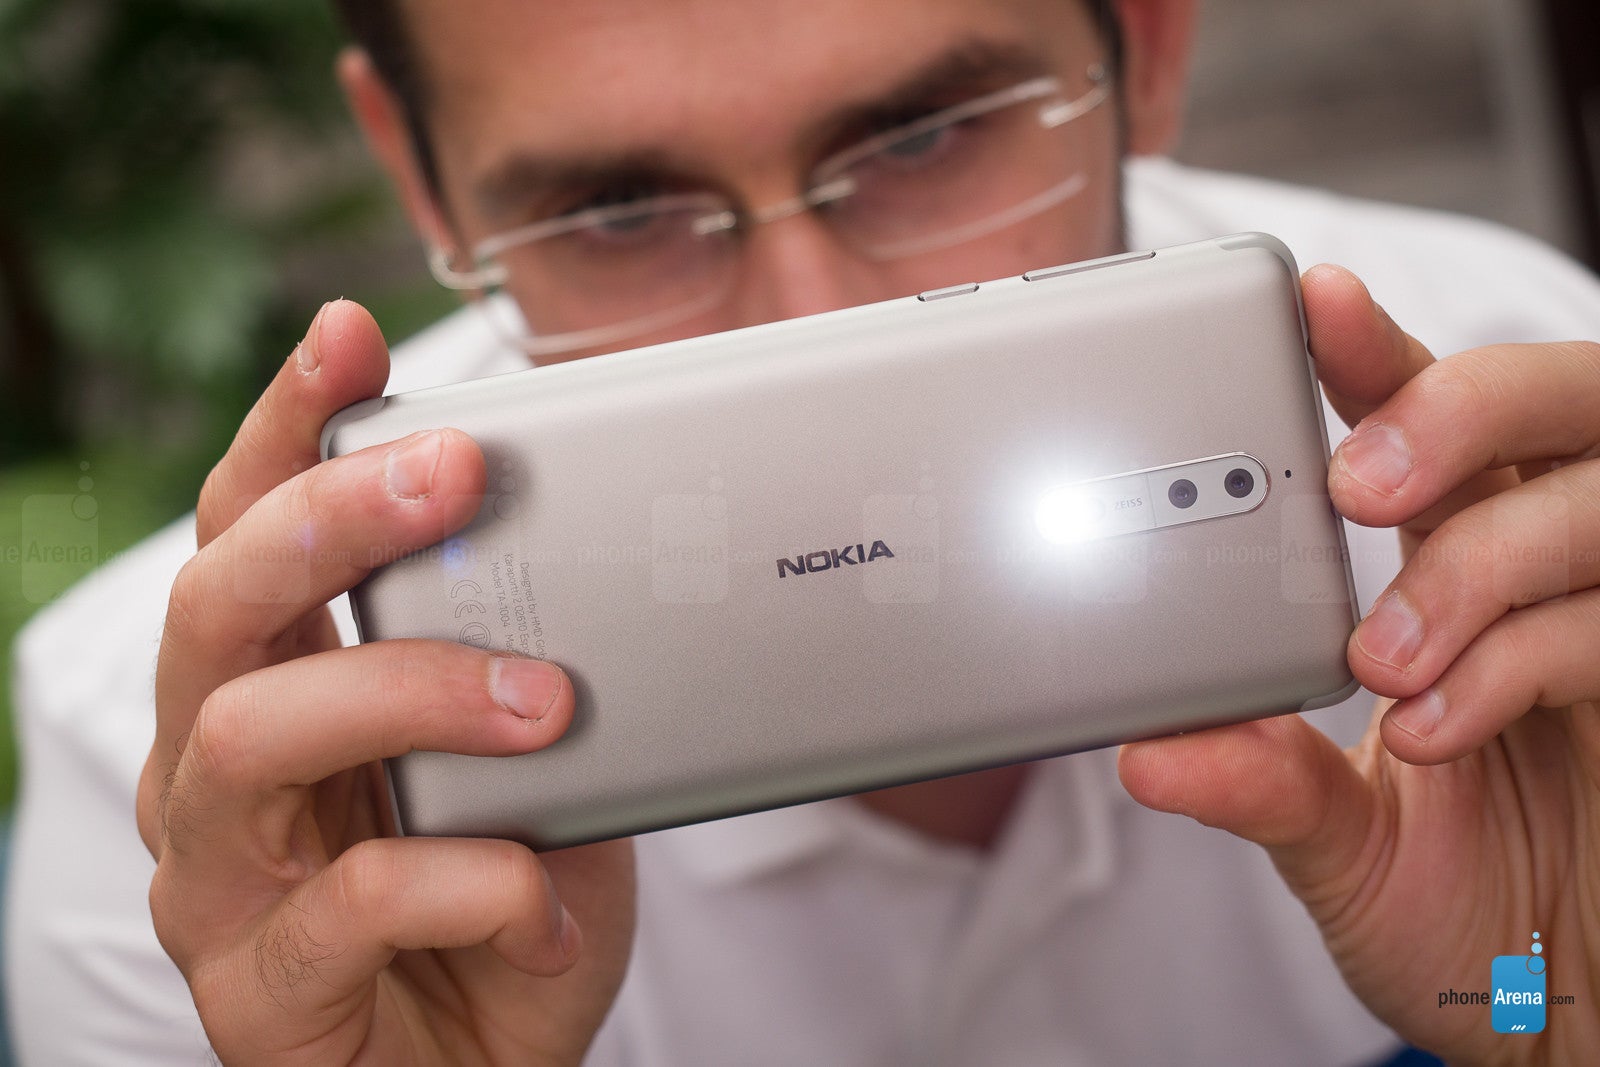 Nokia 6 (2018) specs and pictures revealed by Chinese regulator agency